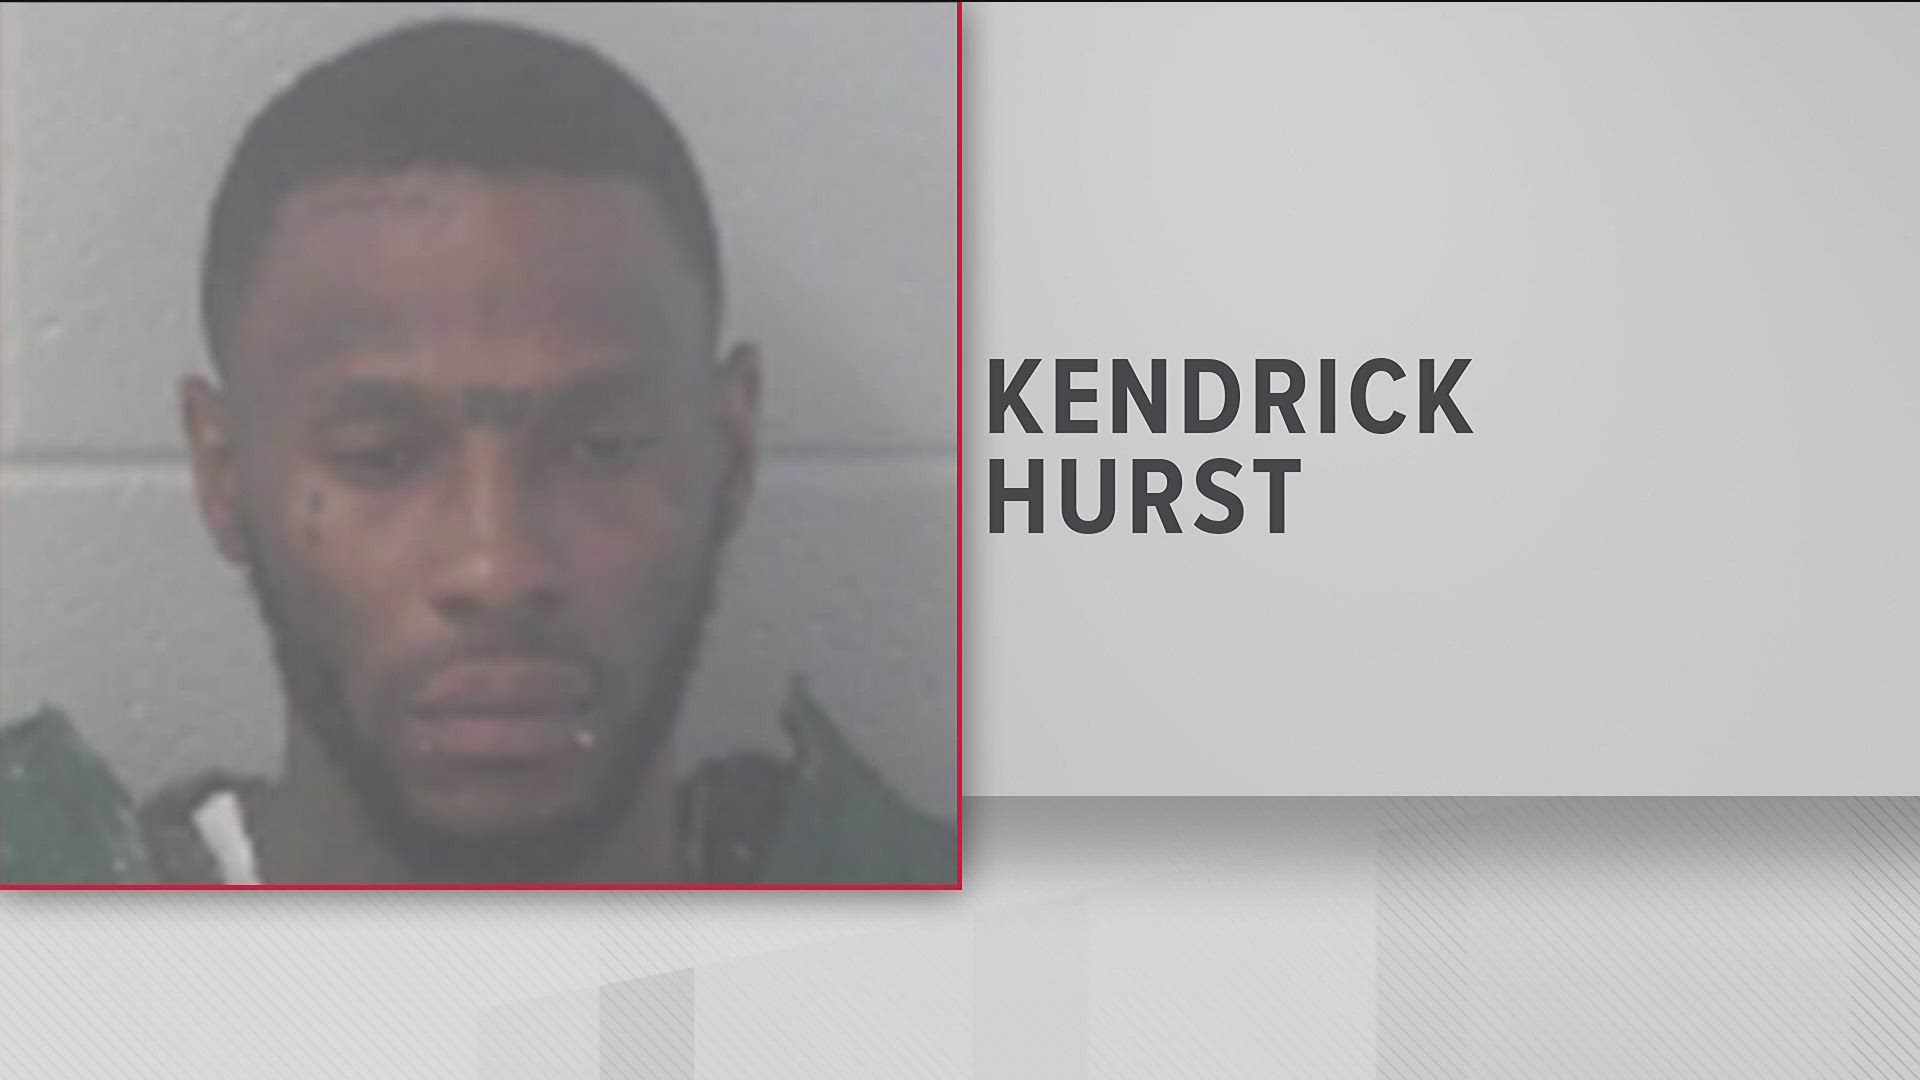 The sheriff's office reported Kendrick Hurst had been sighted in the area of Roy Dial Road early Monday.